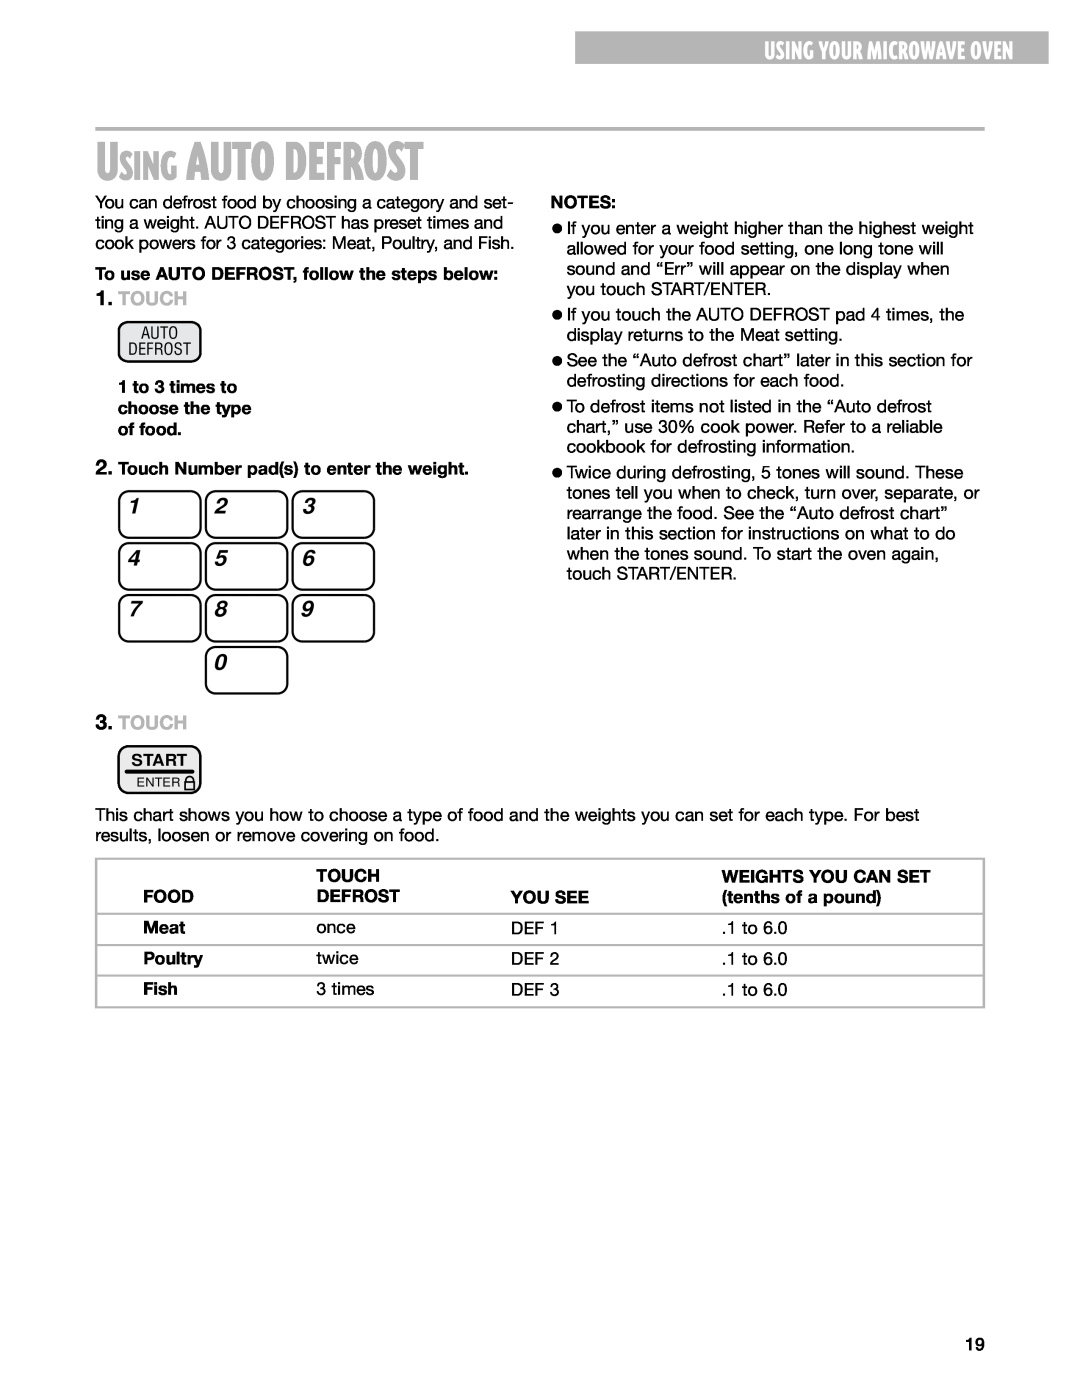 Whirlpool MT1071SG, MT1078SG installation instructions Using Auto Defrost, 1 2 4 5, Using Your Microwave Oven, Touch 